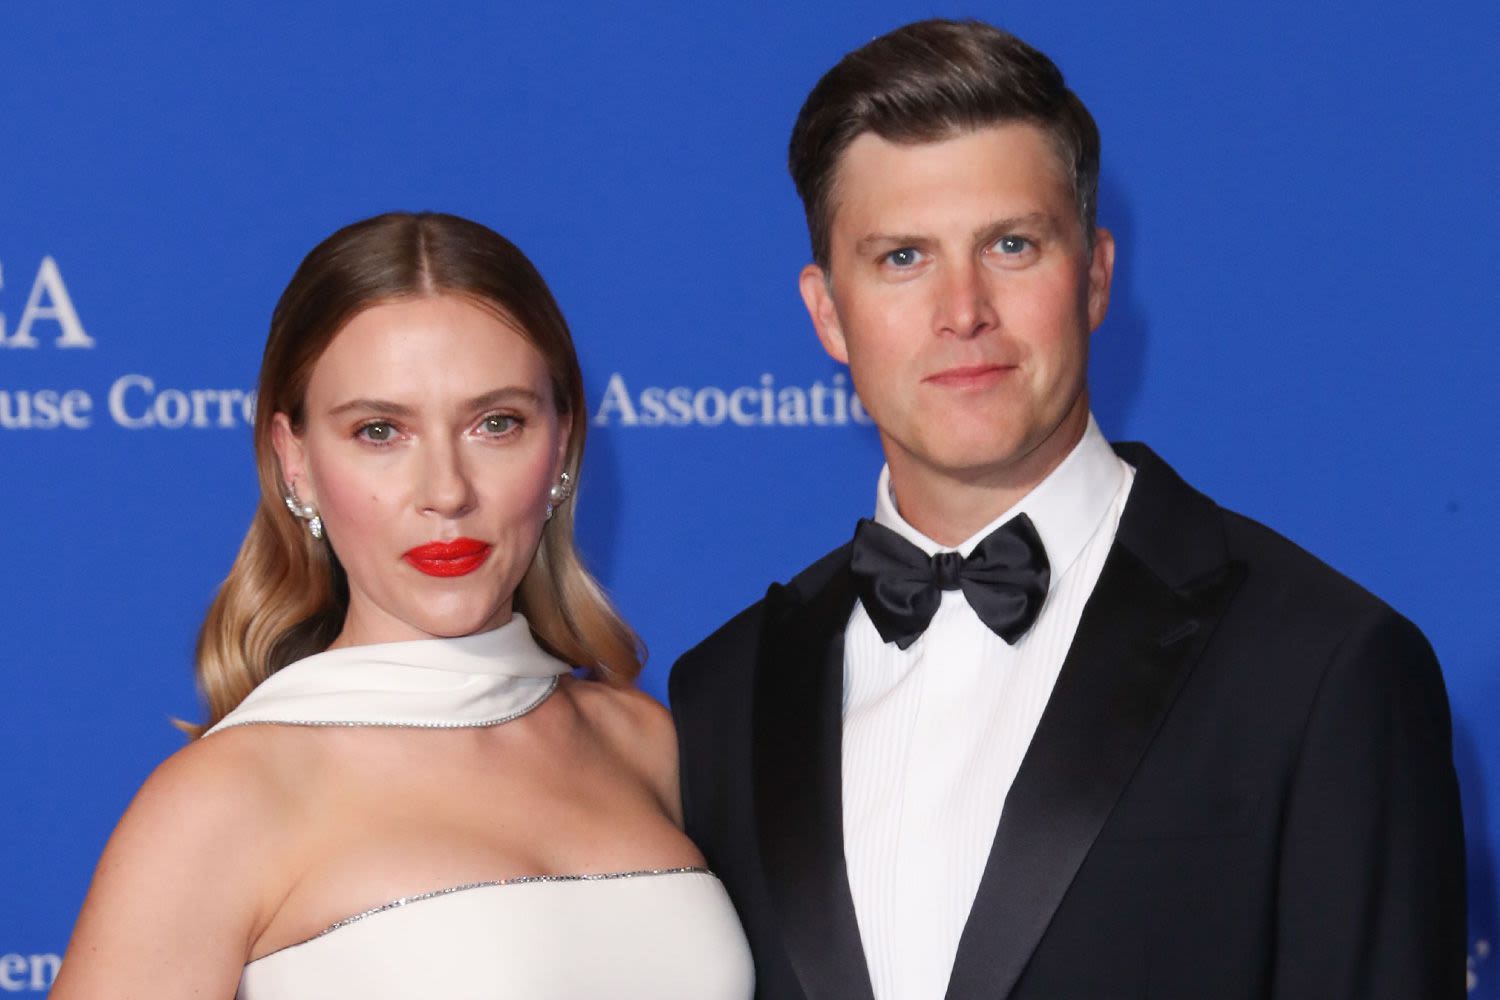 How Colin Jost Reacted to Watching Wife Scarlett Johansson in a 'Montage of Kisses' with Male Costars